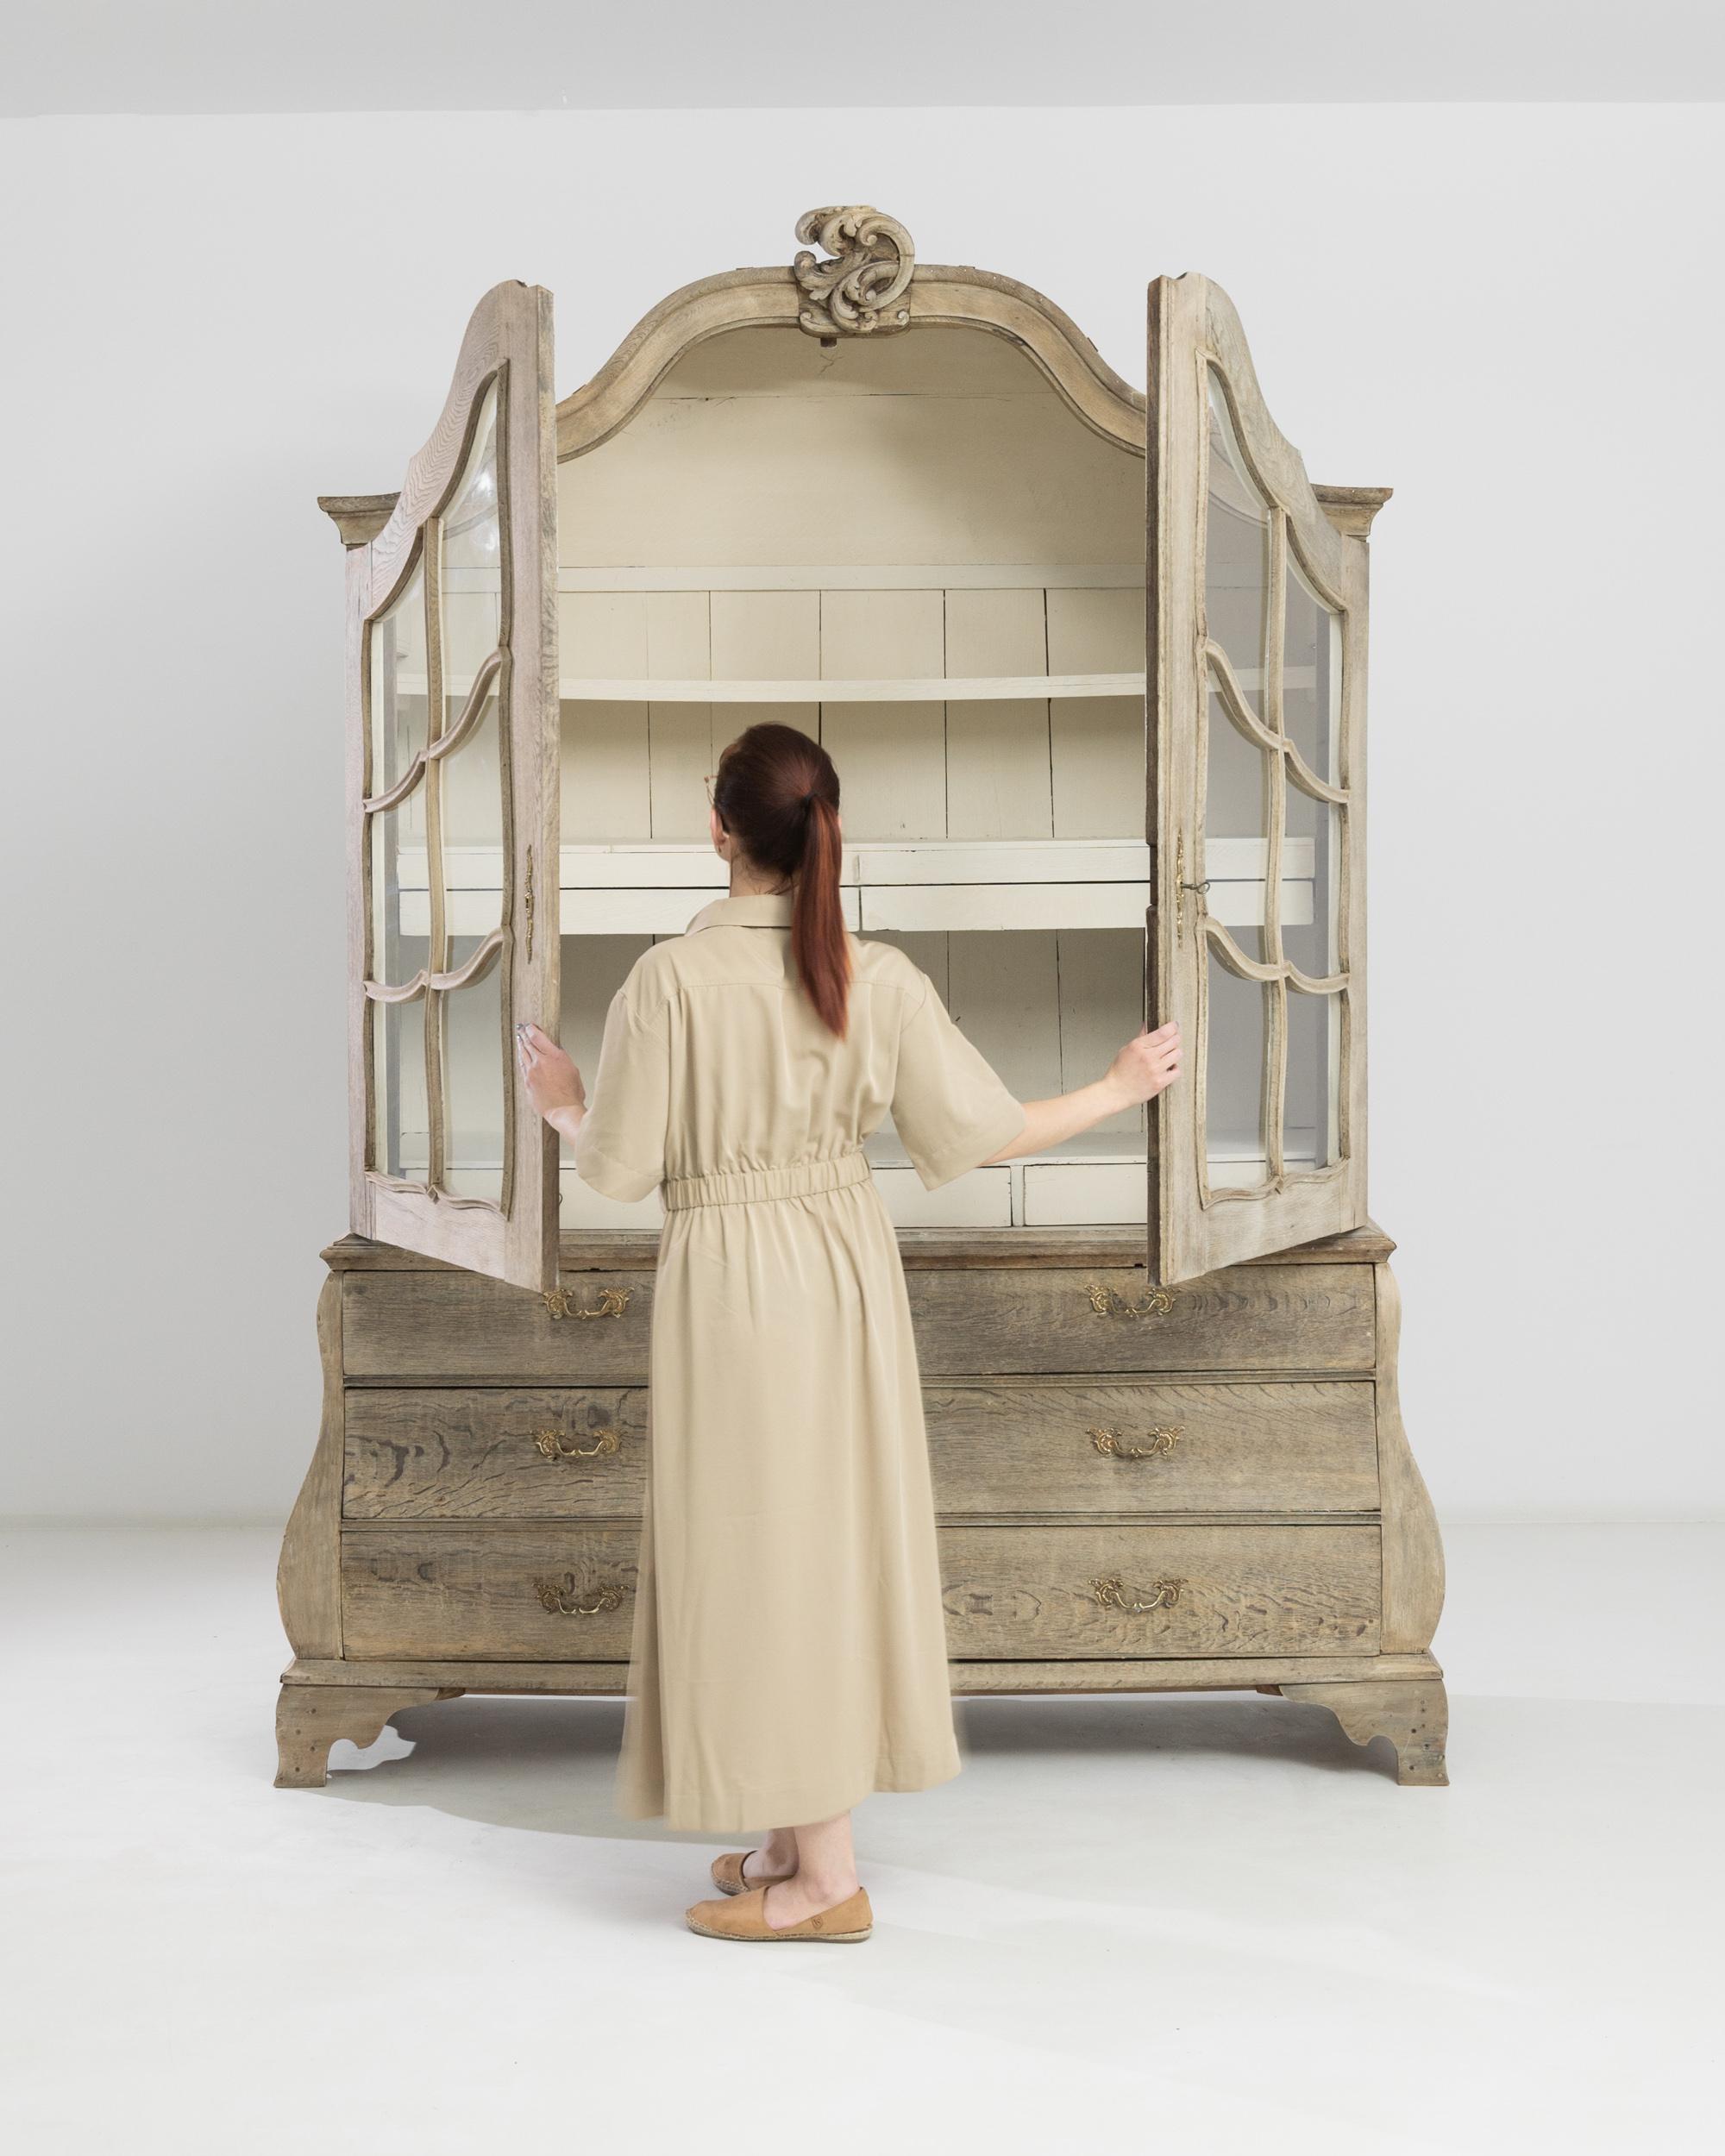 The silhouette of this antique oak vitrine evokes the lavish beauty of the Baroque. Built in the Netherlands circa 1800, serpentine drawers are crowned by an arched cabinet. The panes of the mullioned glass descend in delicate lace-like cascades to